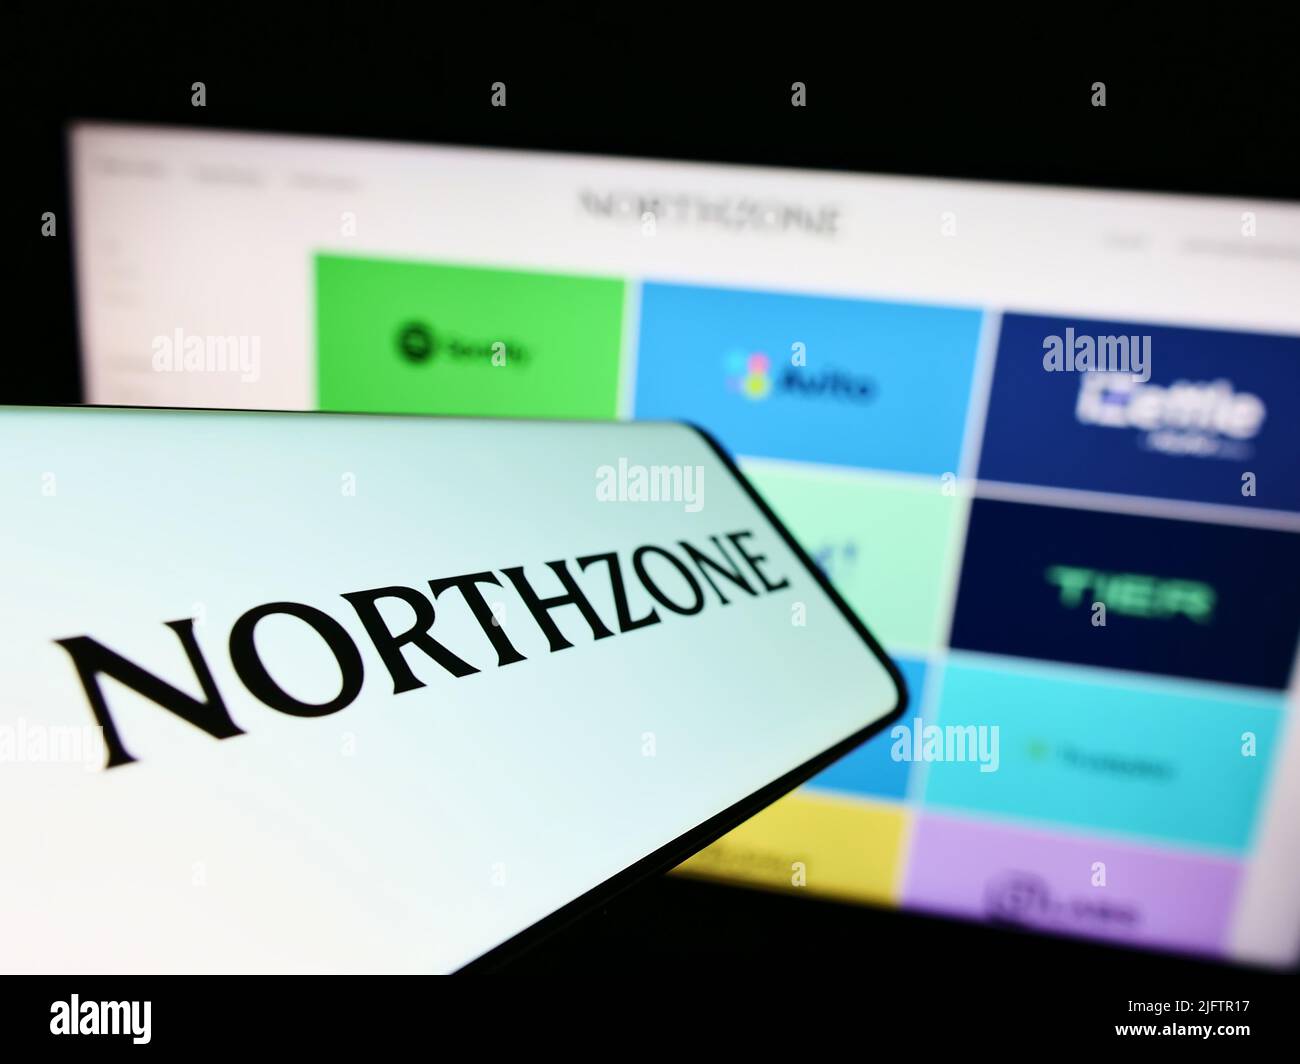 Cellphone with logo of British venture capital company Northzone on screen in front of business website. Focus on center of phone display. Stock Photo